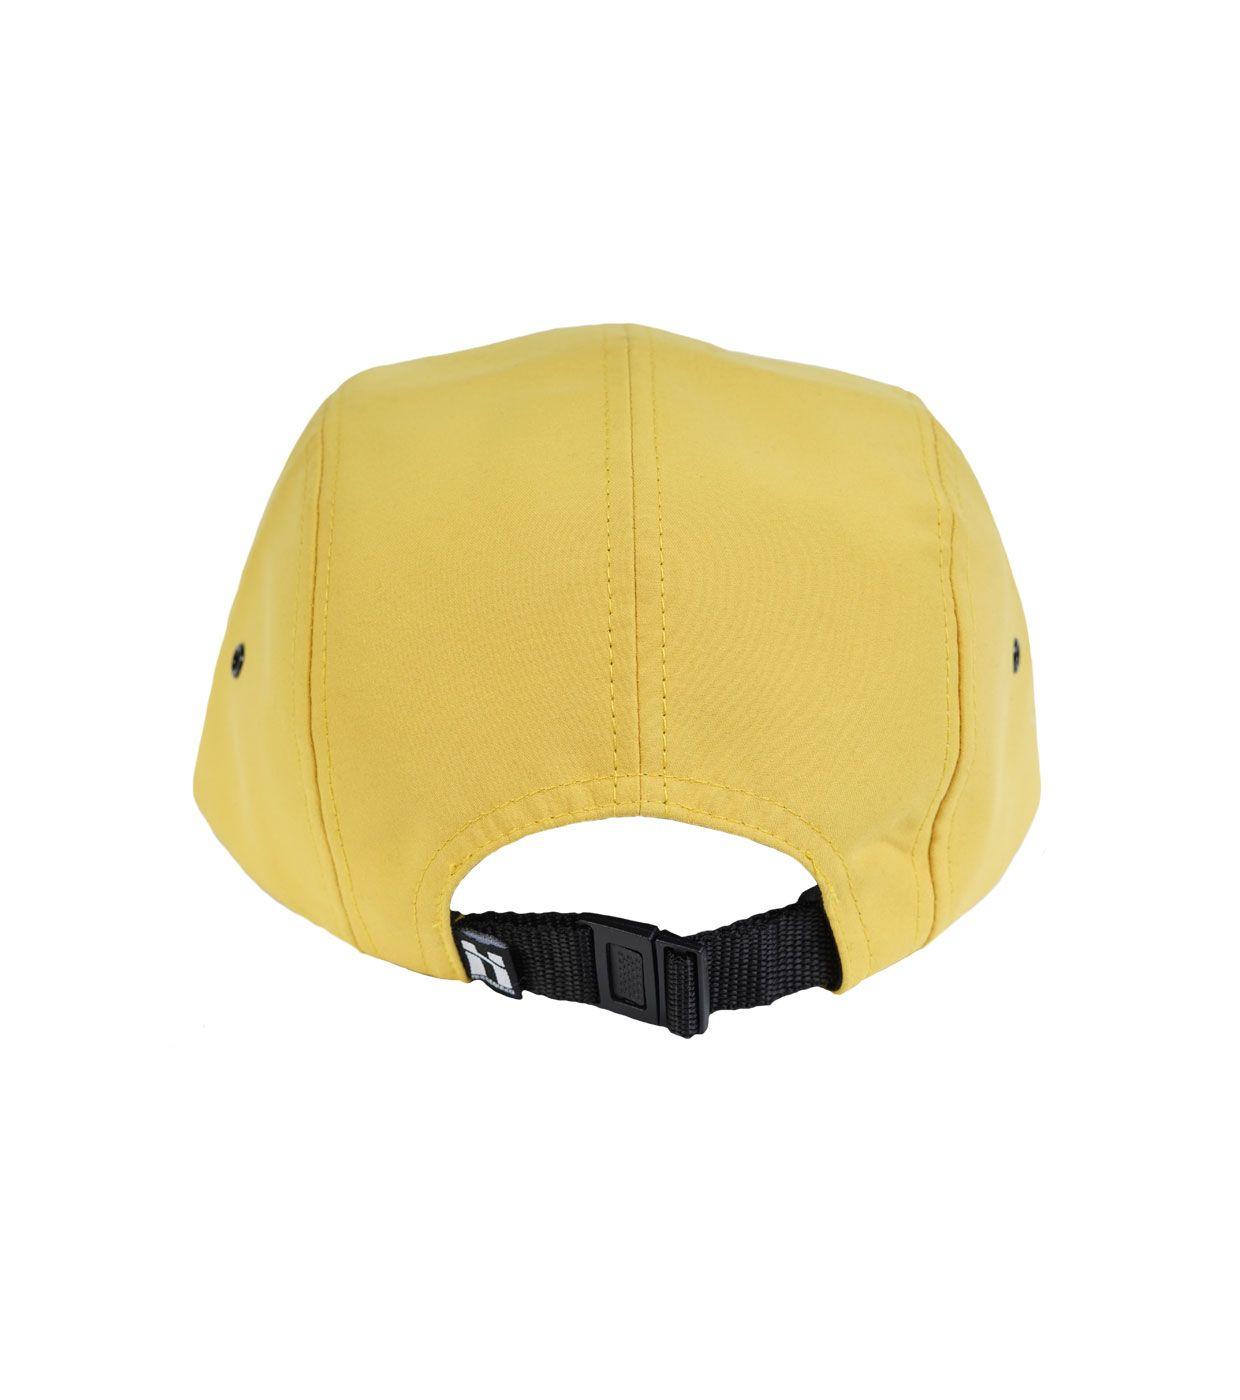 Black with a Dot of Yellow I Logo - Mr. Serious fat cap series, Yellow super fat cap. Yellow 5 panel ...